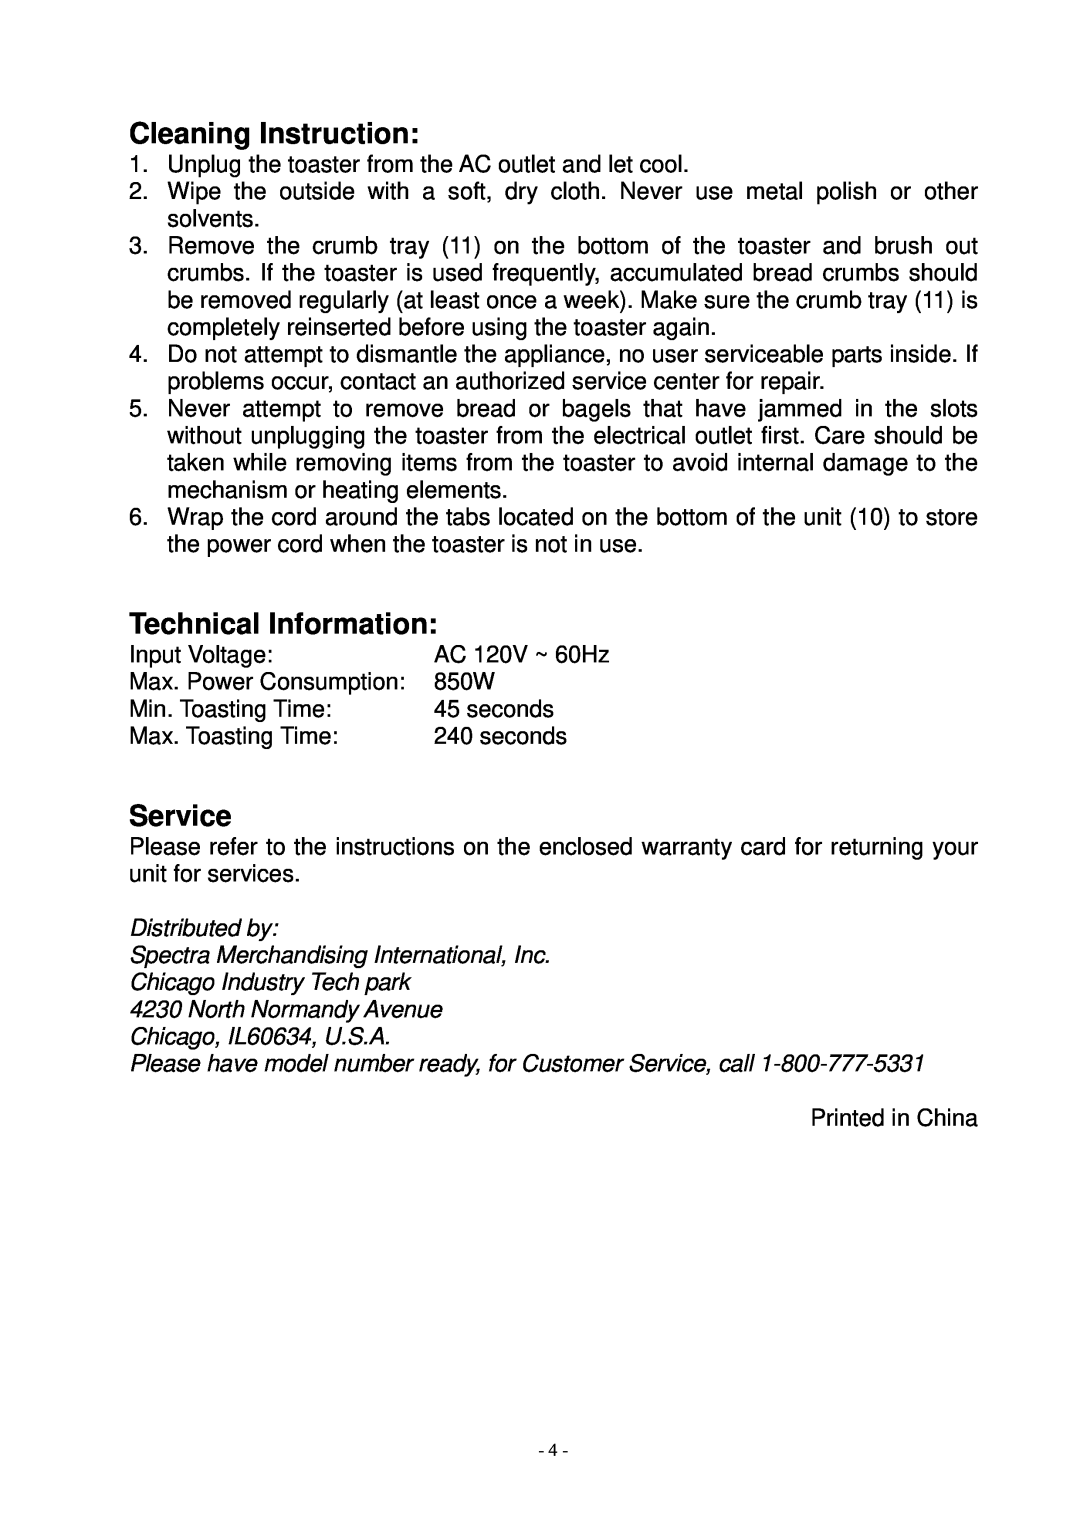 Spectra KT5211 owner manual Cleaning Instruction, Technical Information, Service, Distributed by 